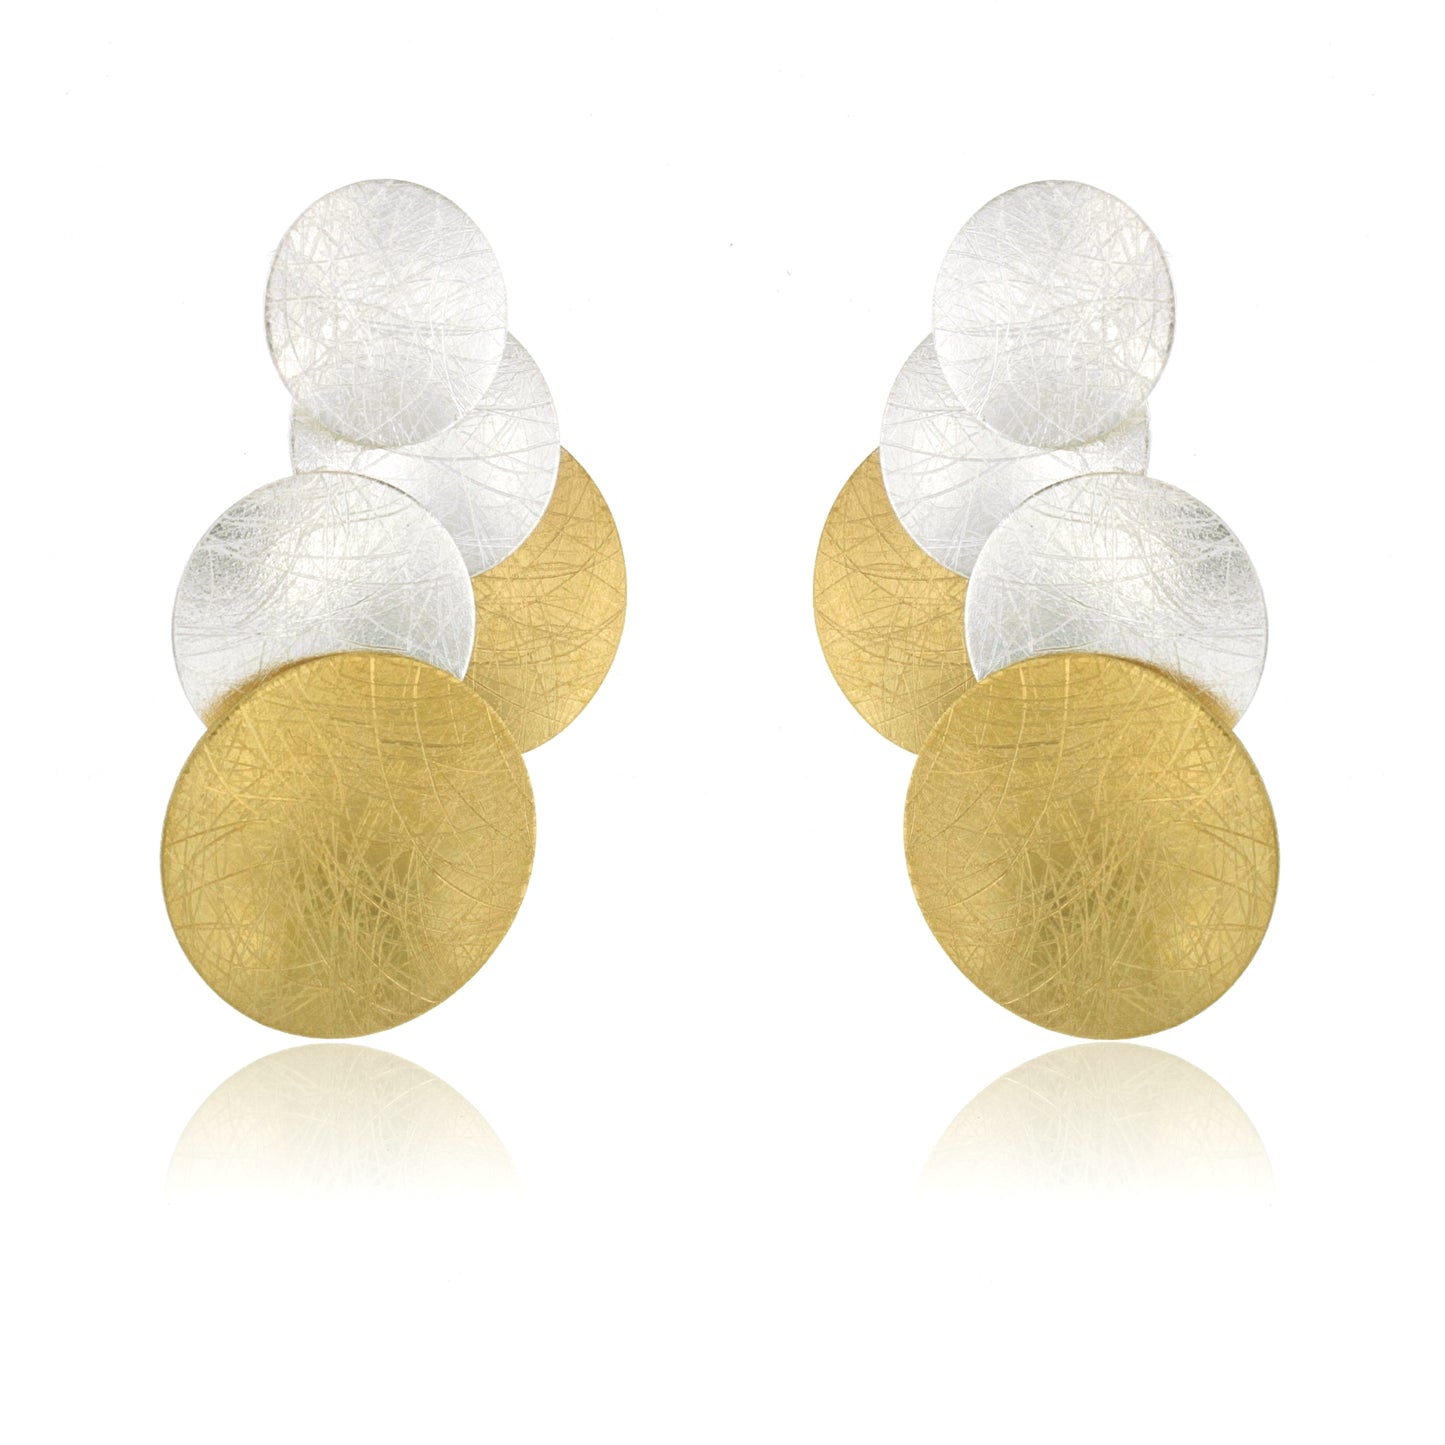 Mysterium Collection "5 Circles" Silver & Vermeil Earrings